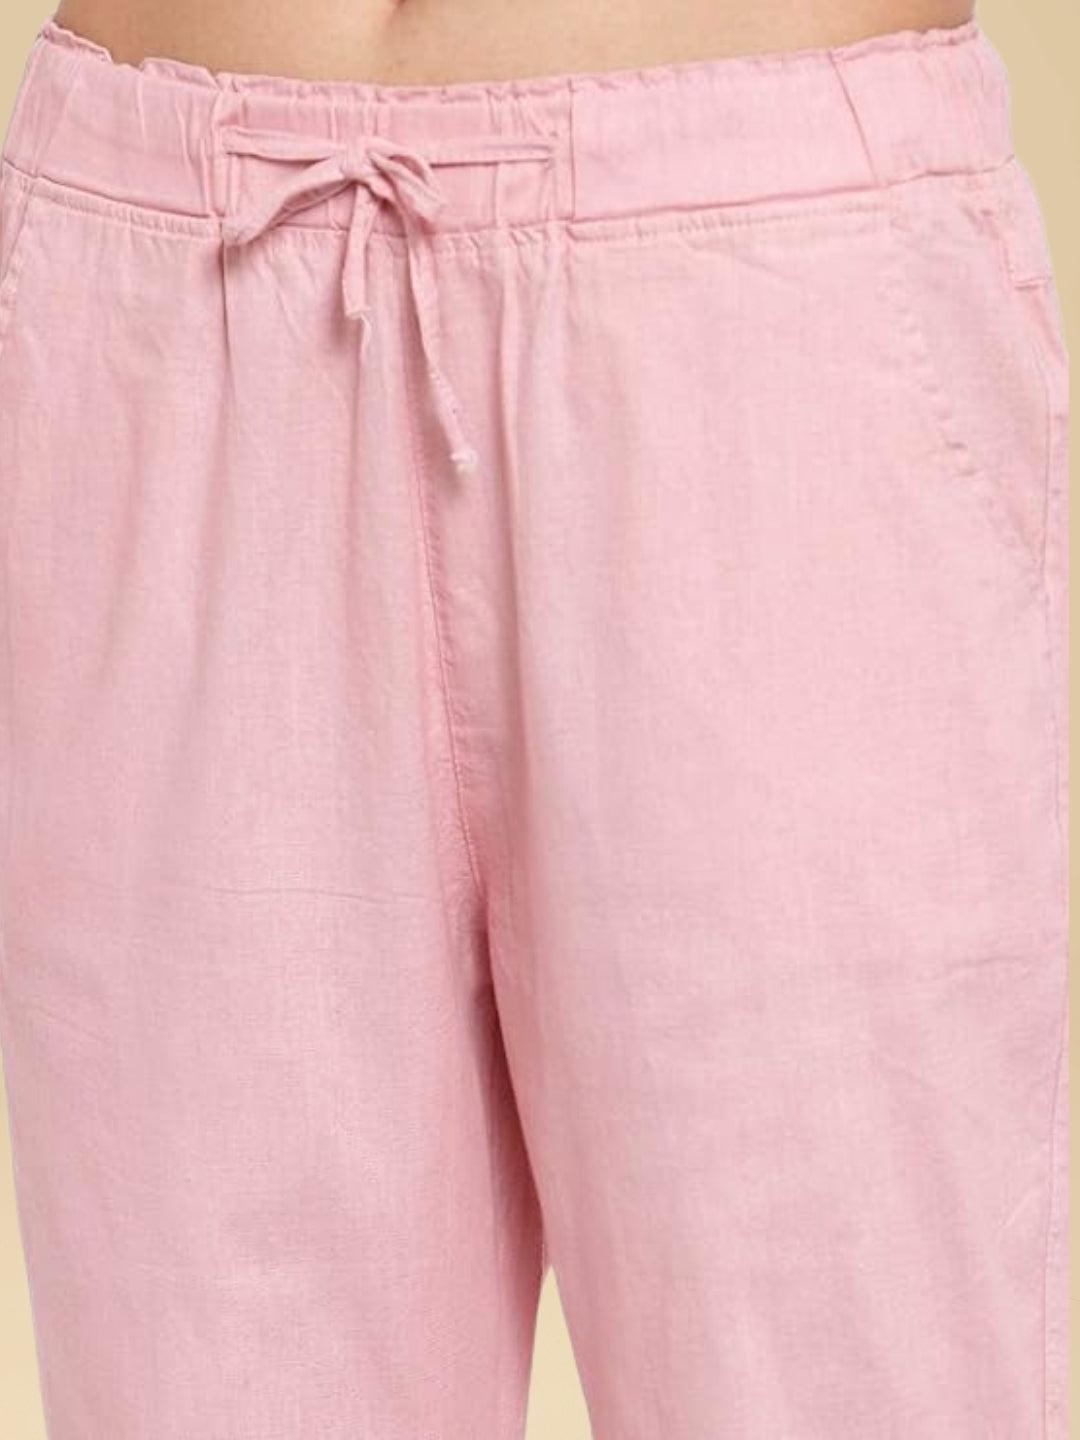 Women Narrow-Fit Ankle Length Pink Lower